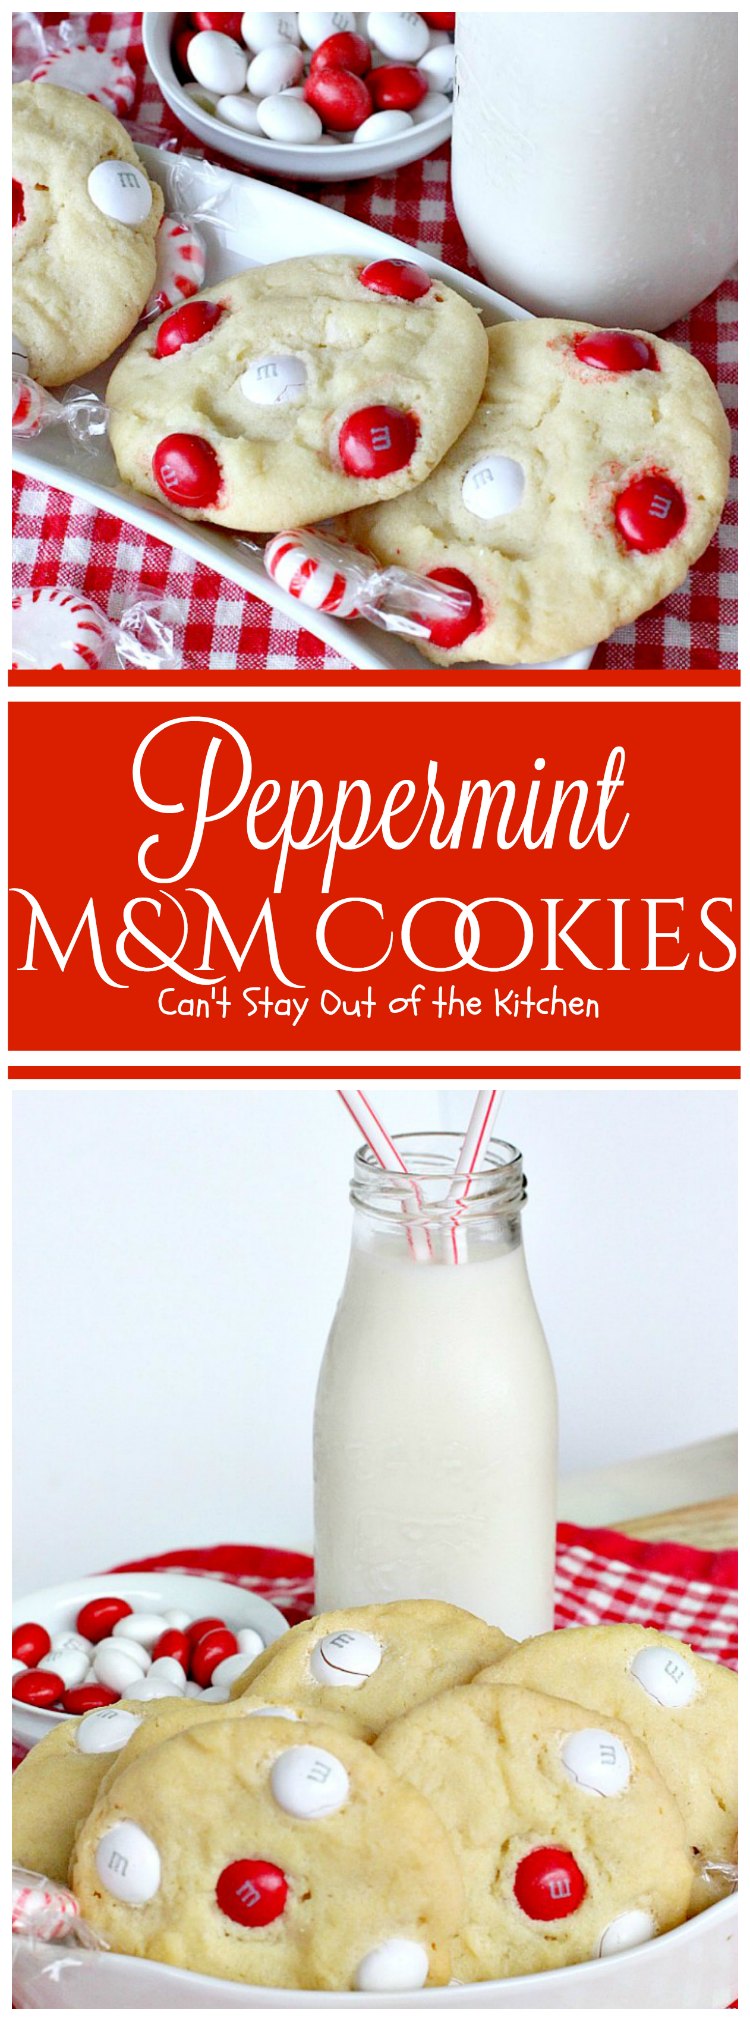 Peppermint M&M Cookies | Can't Stay Out of the Kitchen